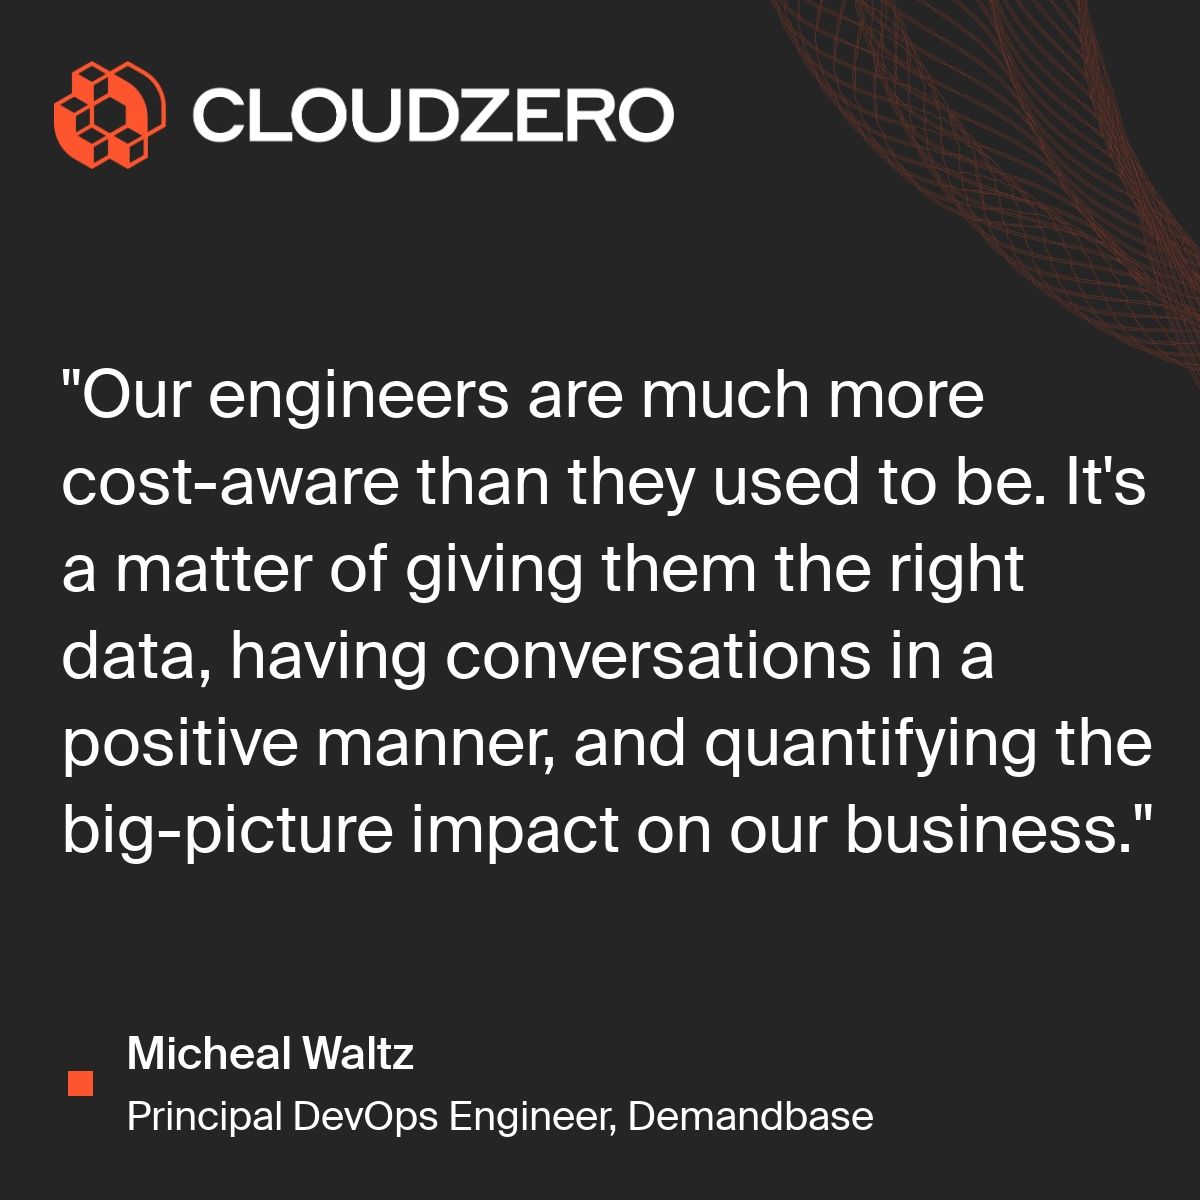 Micheal Waltz is elevating cost awareness at Demandbase! Learn more about Demandbase’s story and how the team provides engineers the right data, fosters positive conversations, and quantifies business impact: bit.ly/49N05iq #CloudOptimization #BusinessImpact